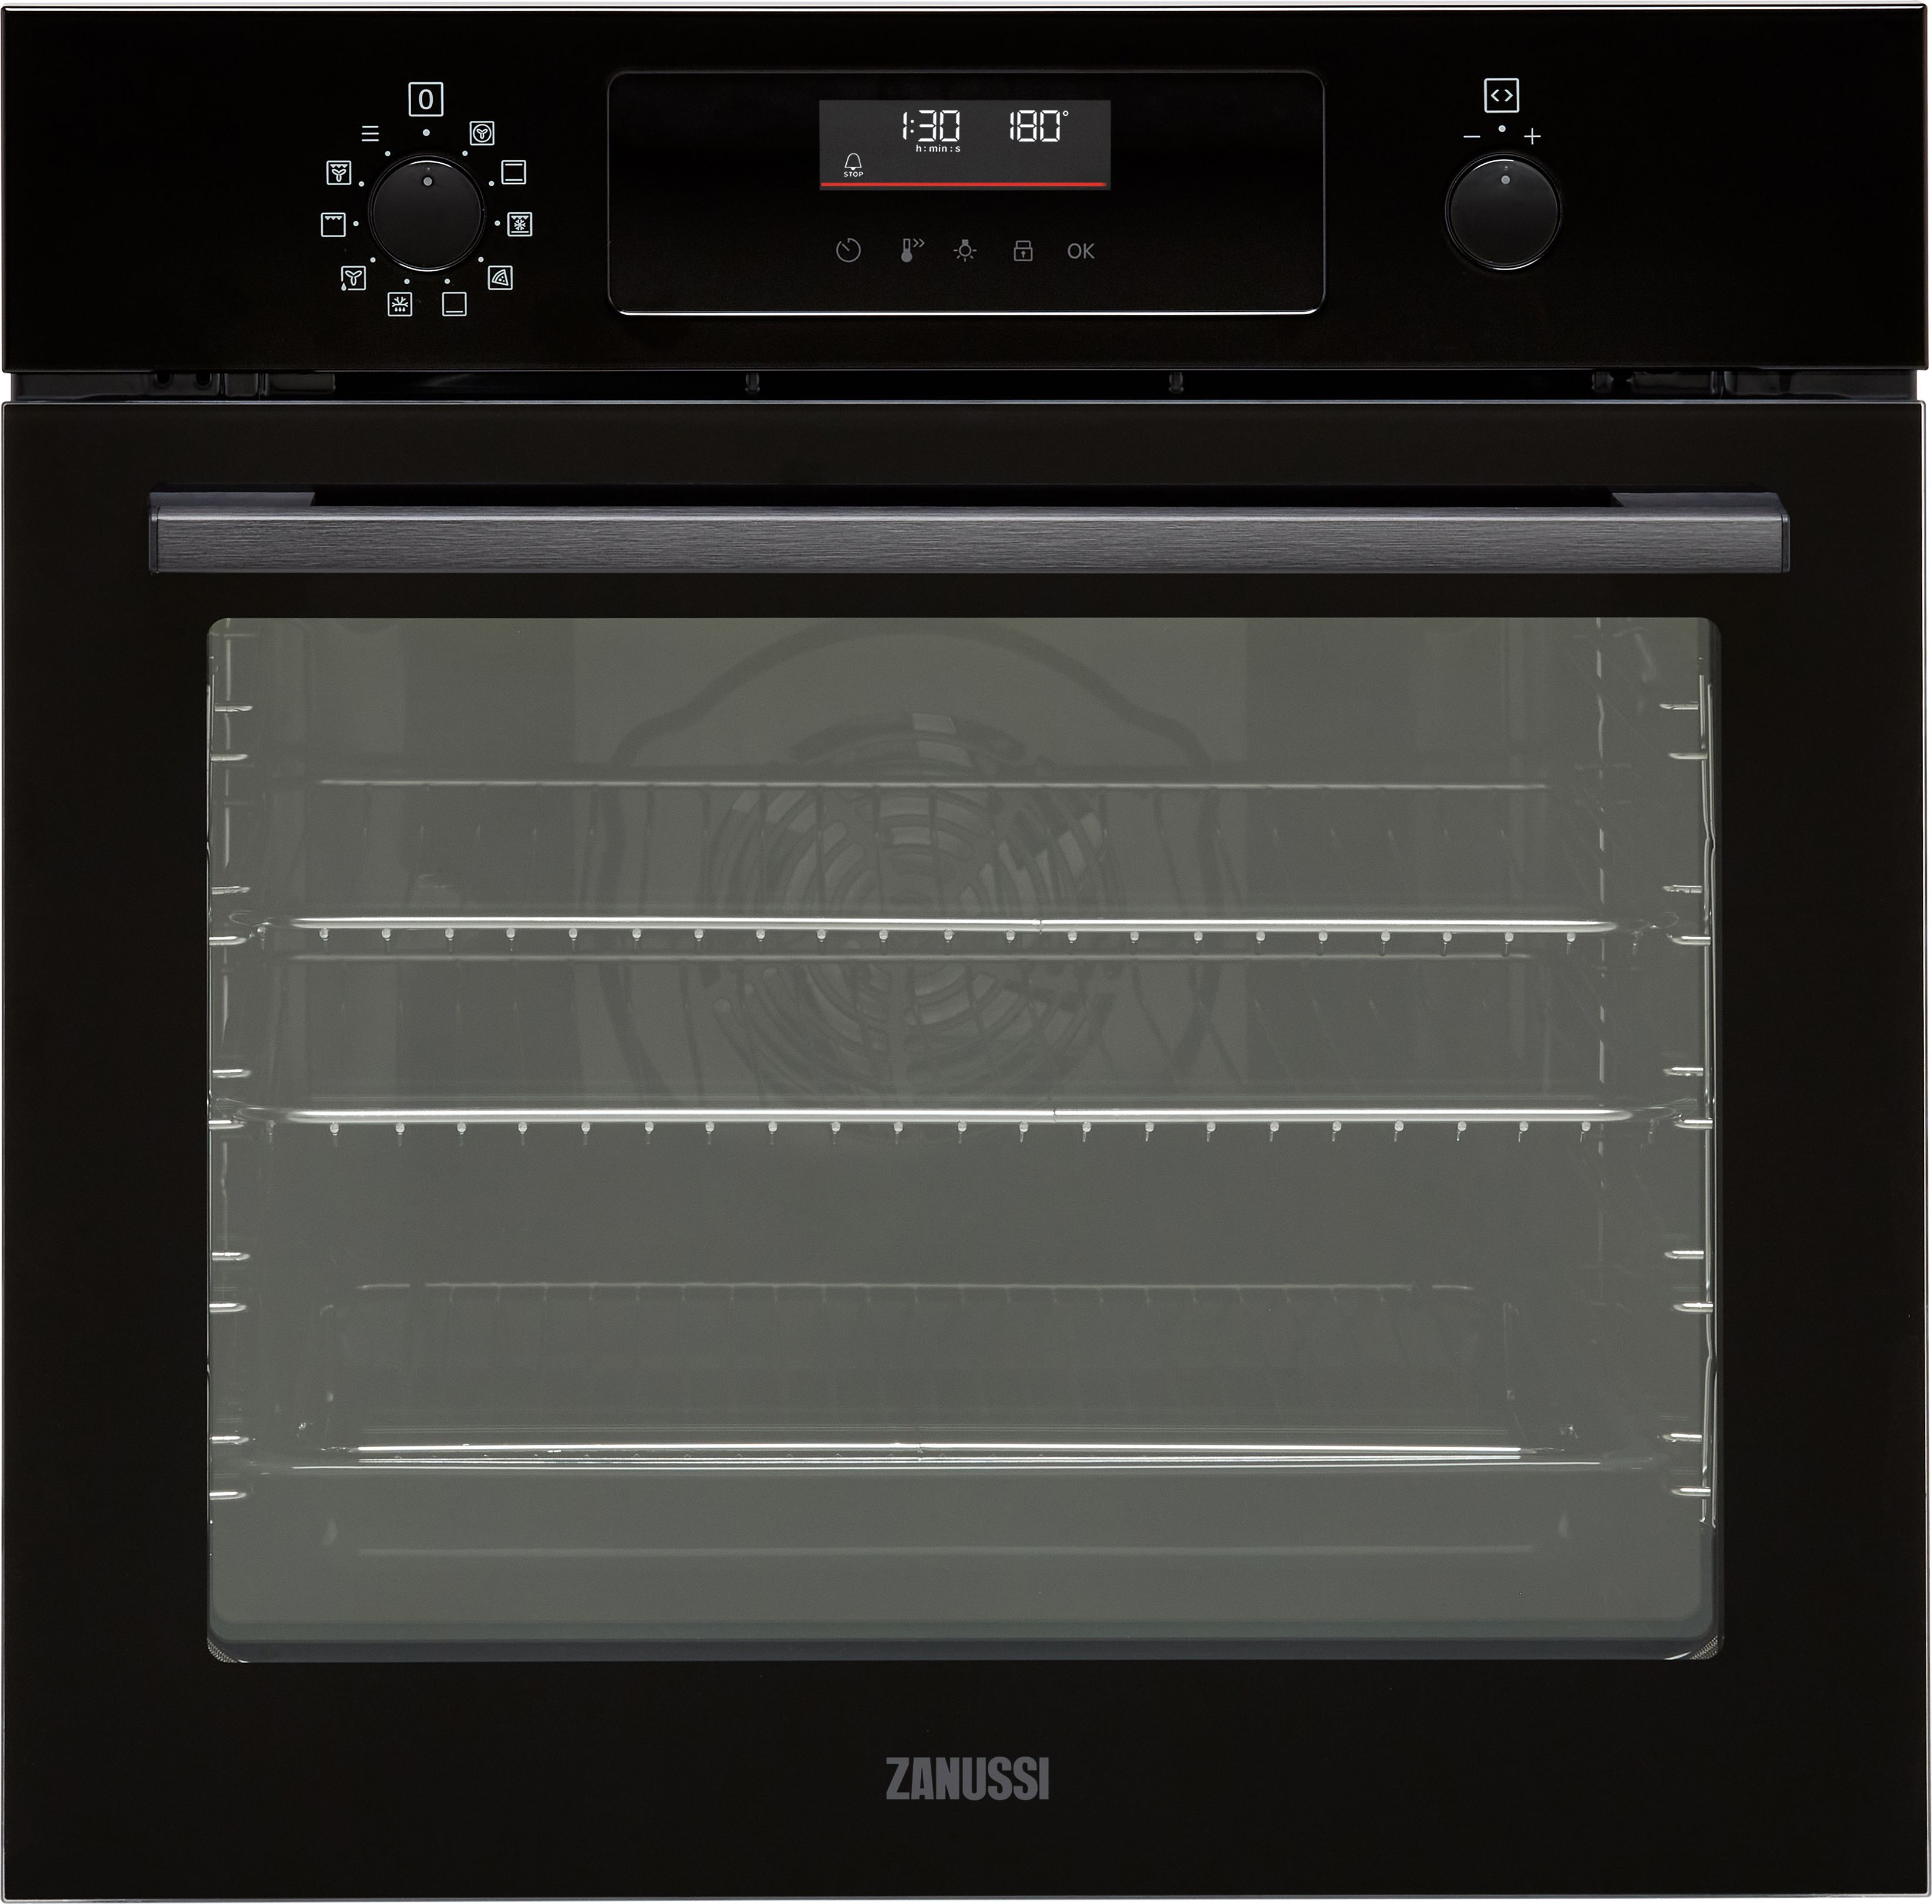 Zanussi ZOPNX6KN Built In Electric Single Oven with Pyrolytic Cleaning - Black - A+ Rated, Black